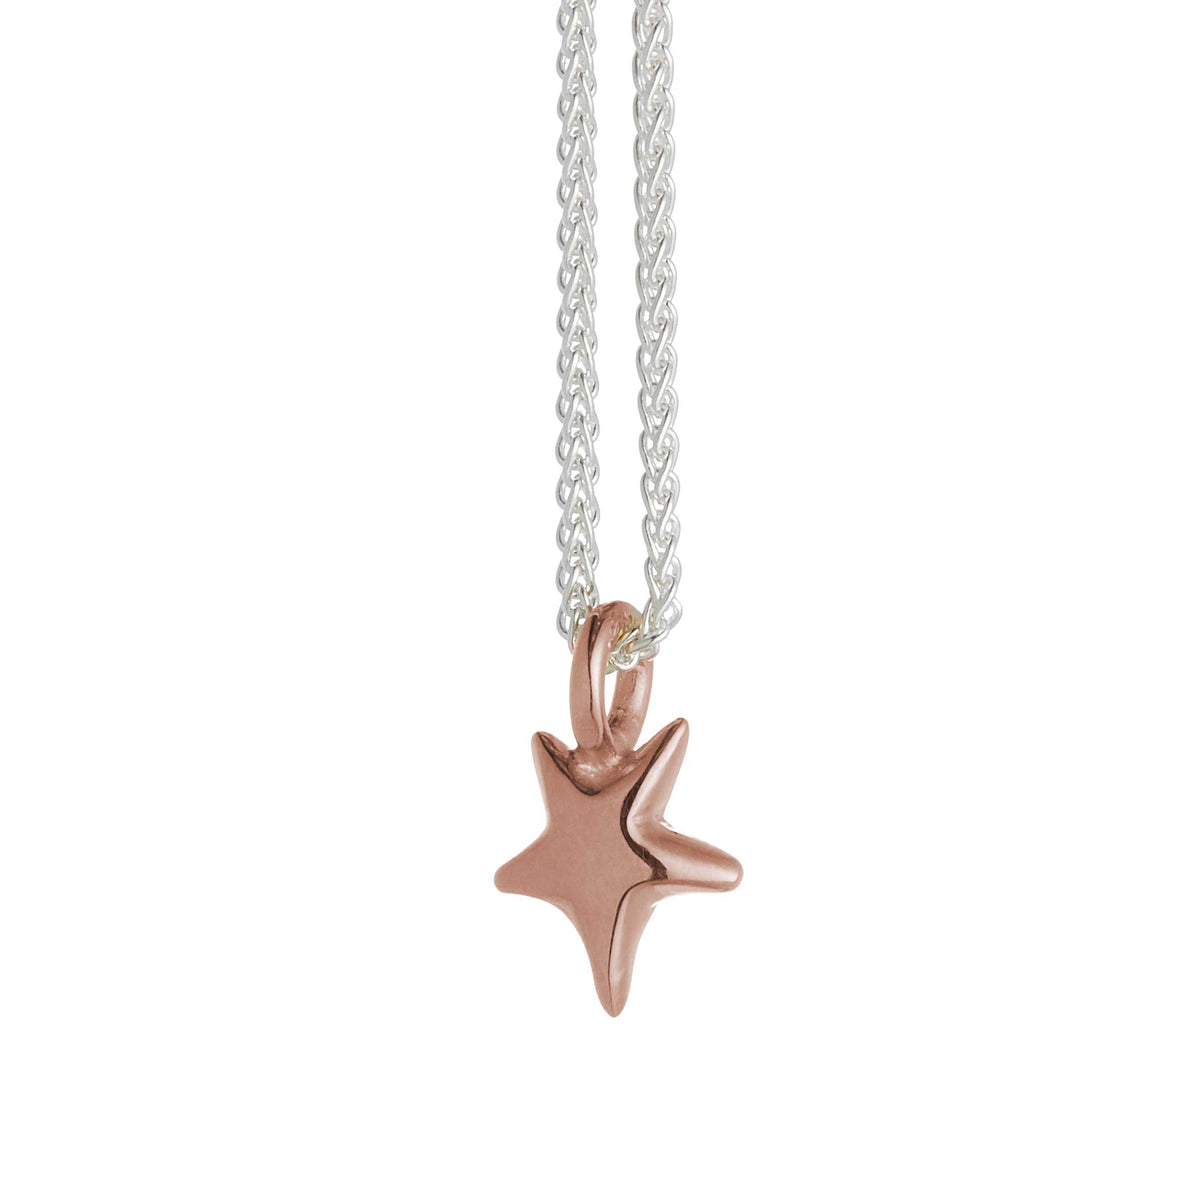 Stardust Silver or Gold Plated Necklace